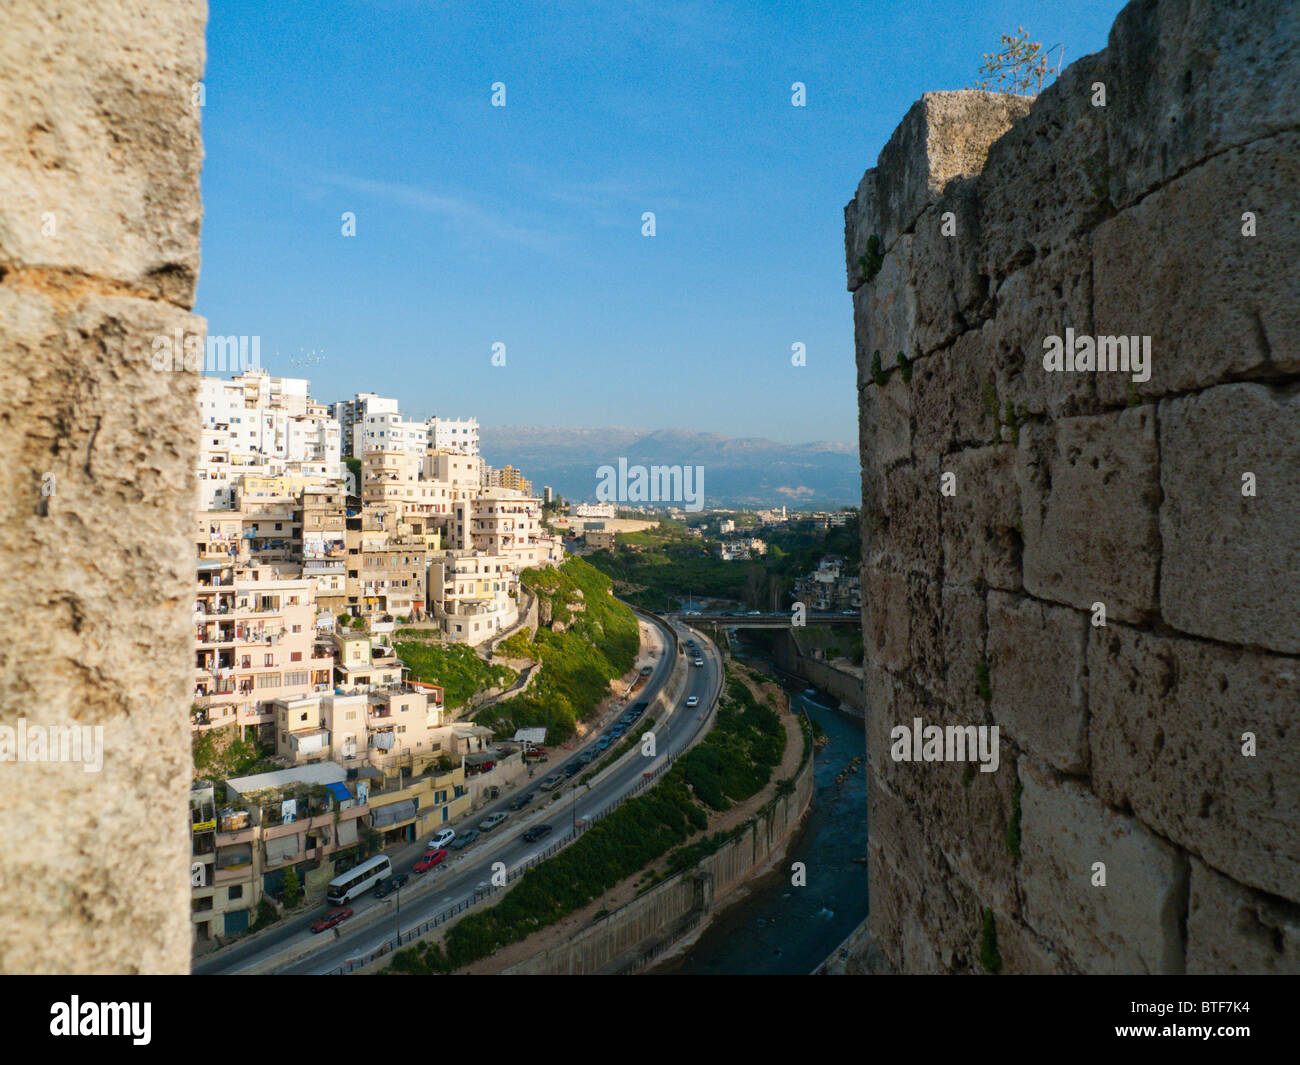 Damascus al-Sham A 2nd millennium BC Capital City View From The Fort  Walls, Southwestern Syria The Middle East Stock Photo